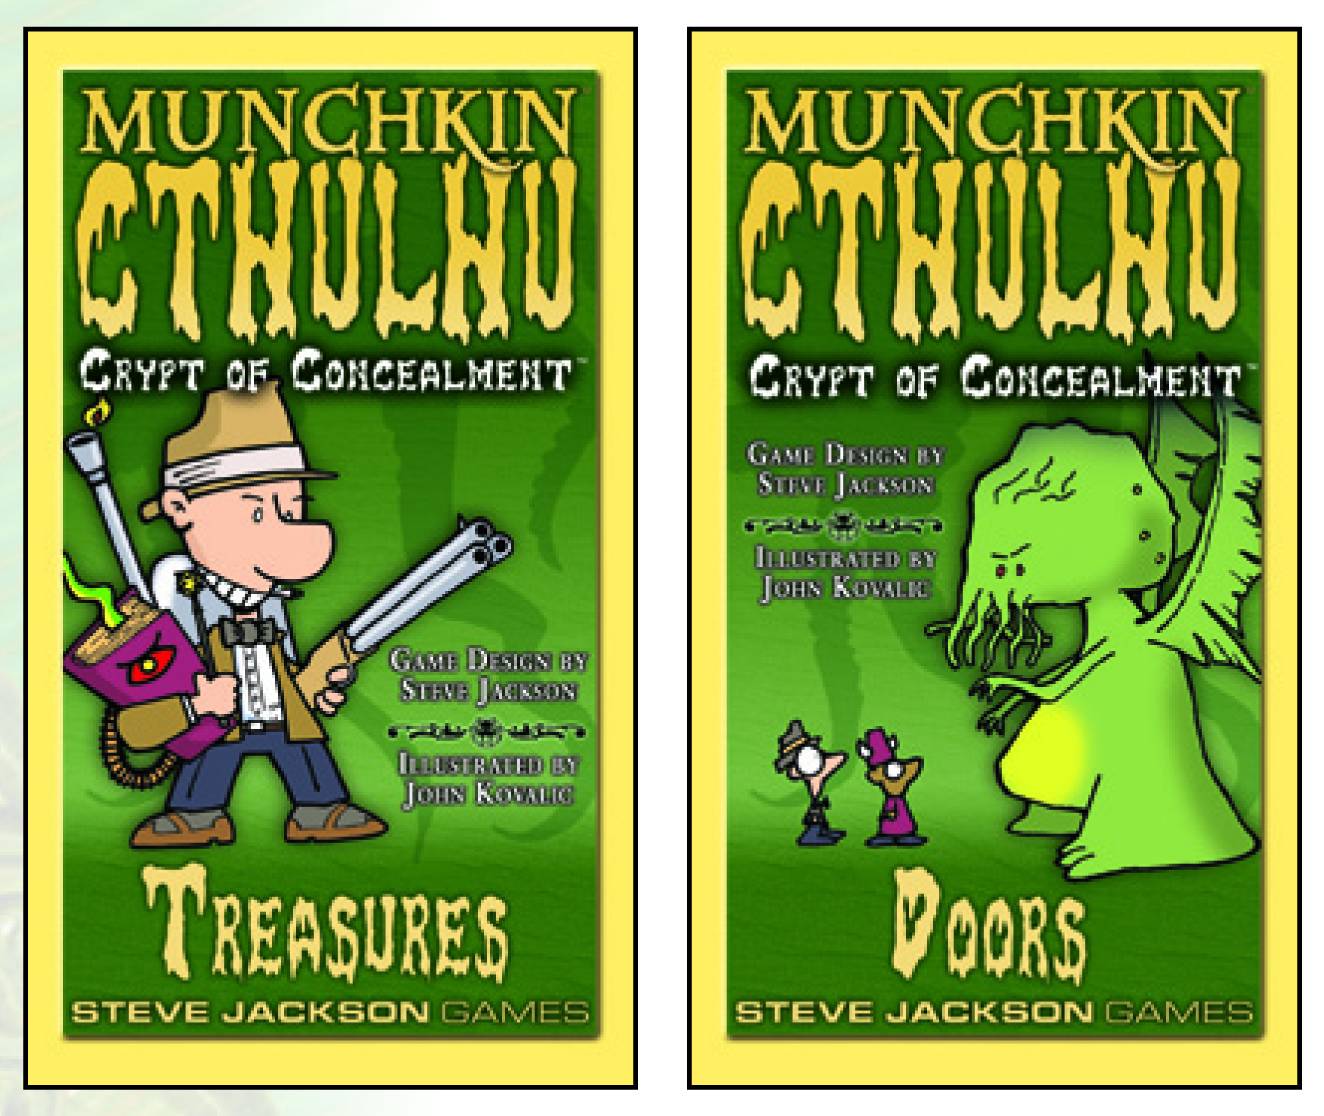 MUNCHKIN CTHULHU CRYPTS OF CONCEALMENT